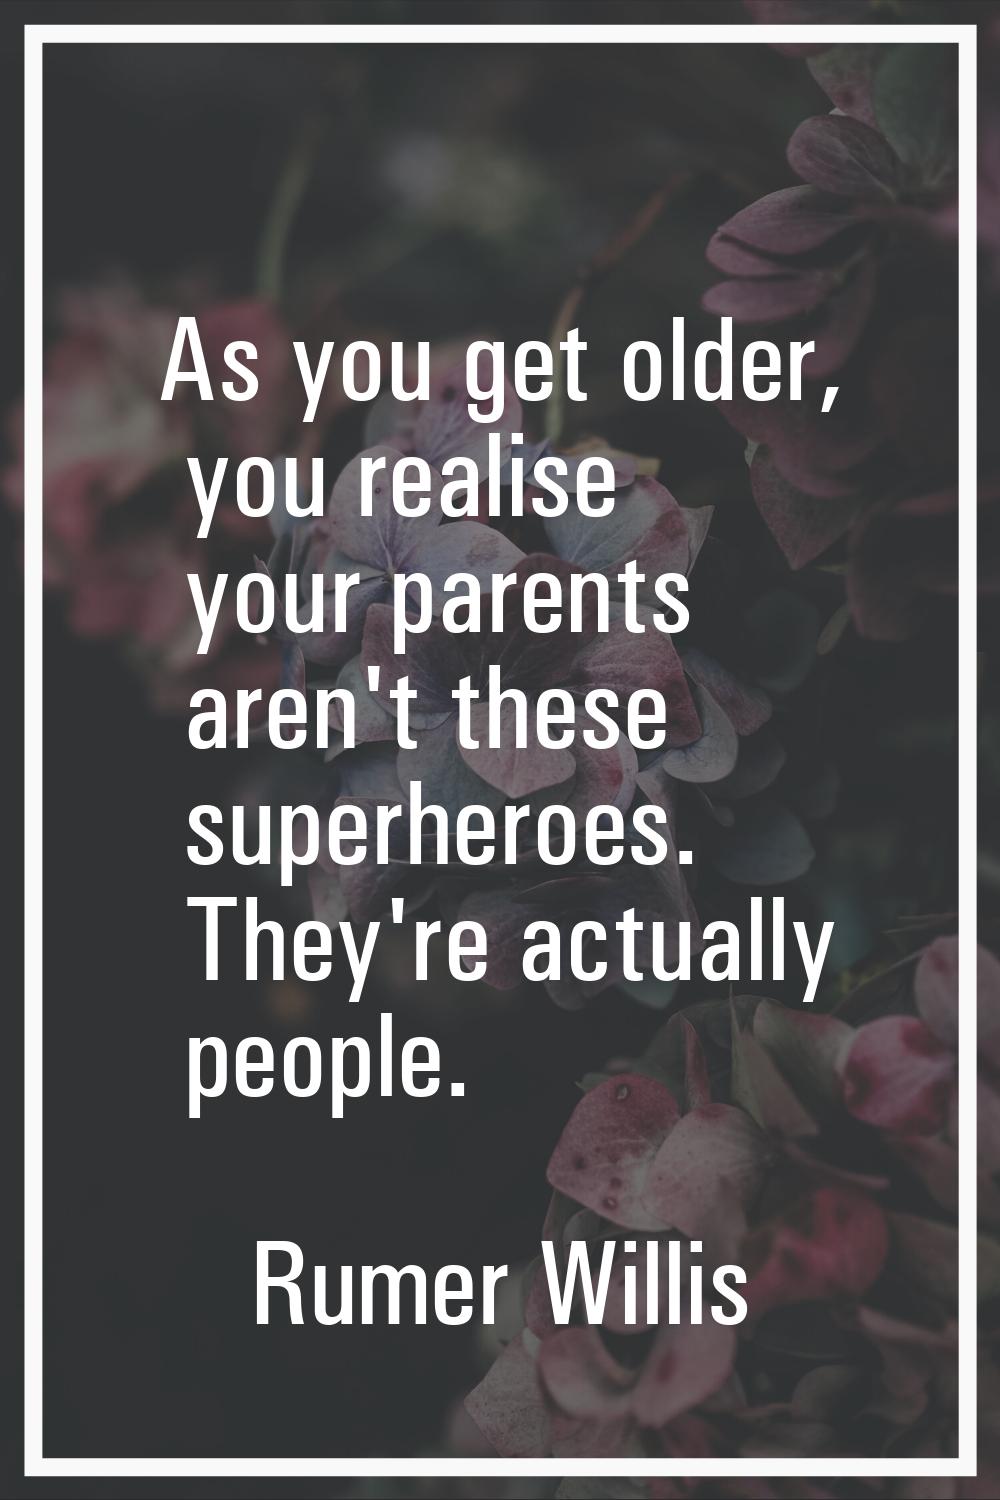 As you get older, you realise your parents aren't these superheroes. They're actually people.